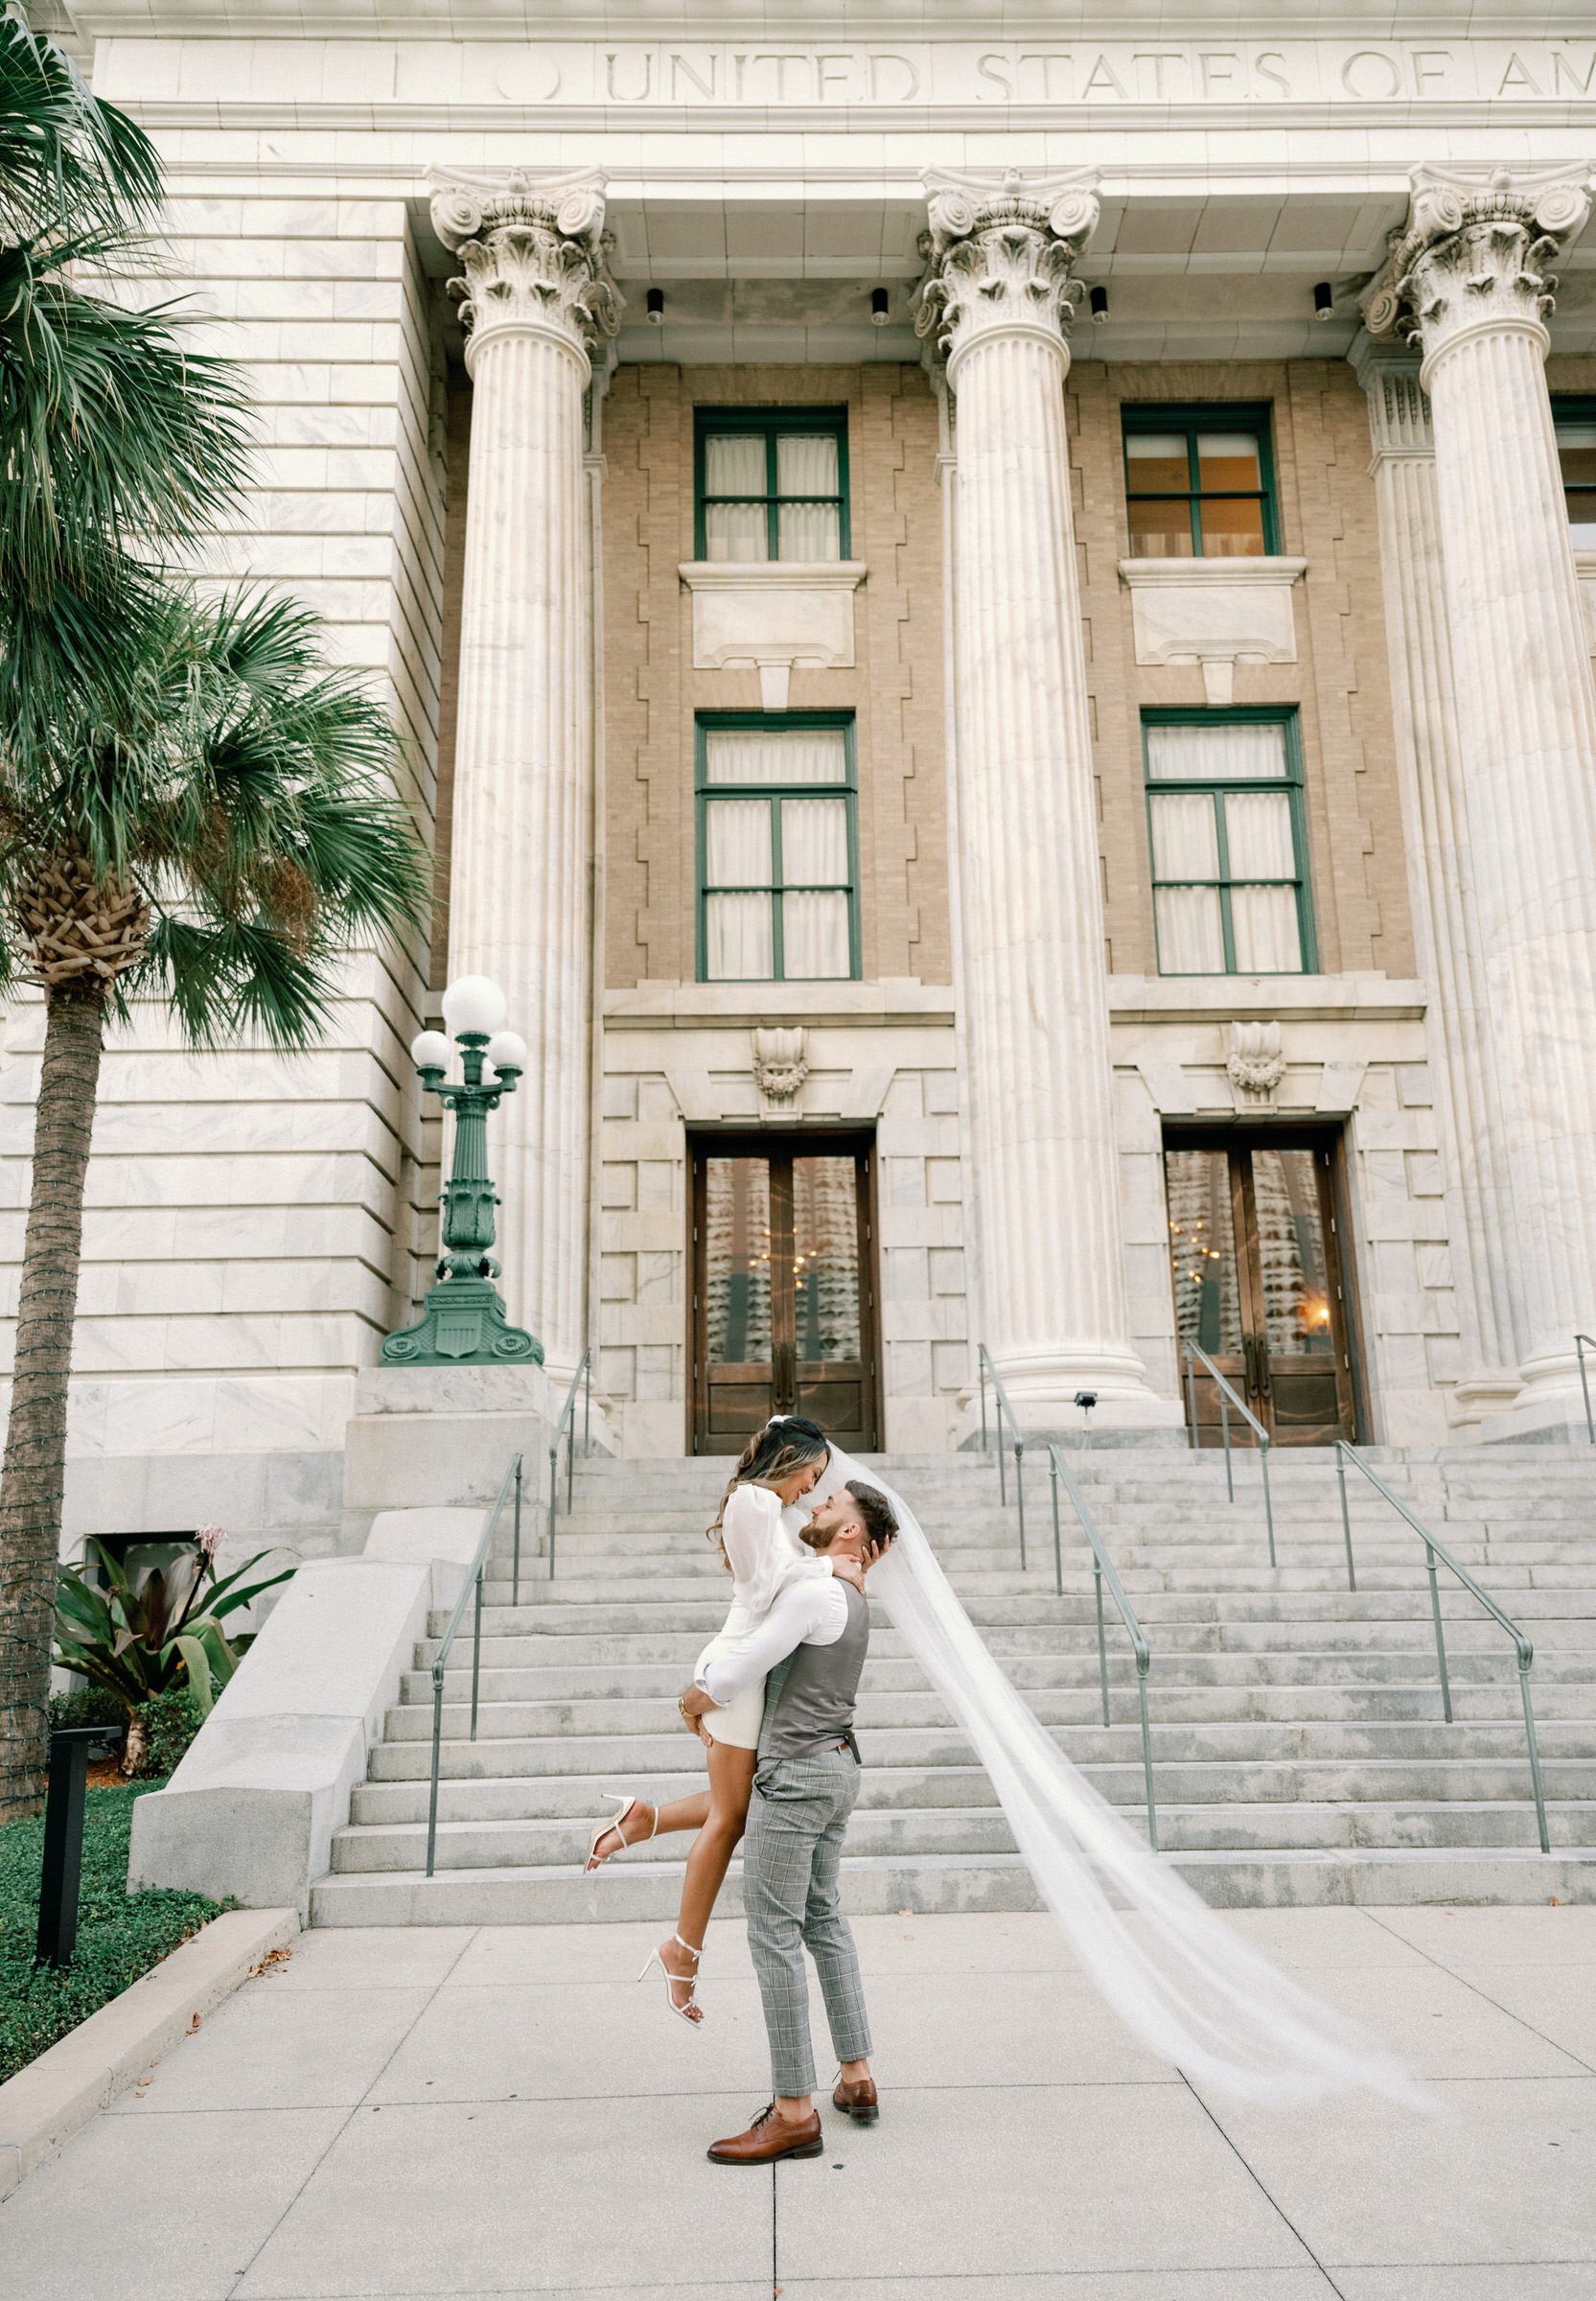 Copyright-Dewitt-for-Love-Photography-M-M-Ybor-City-Tampa-Engagement-Session-86.jpg